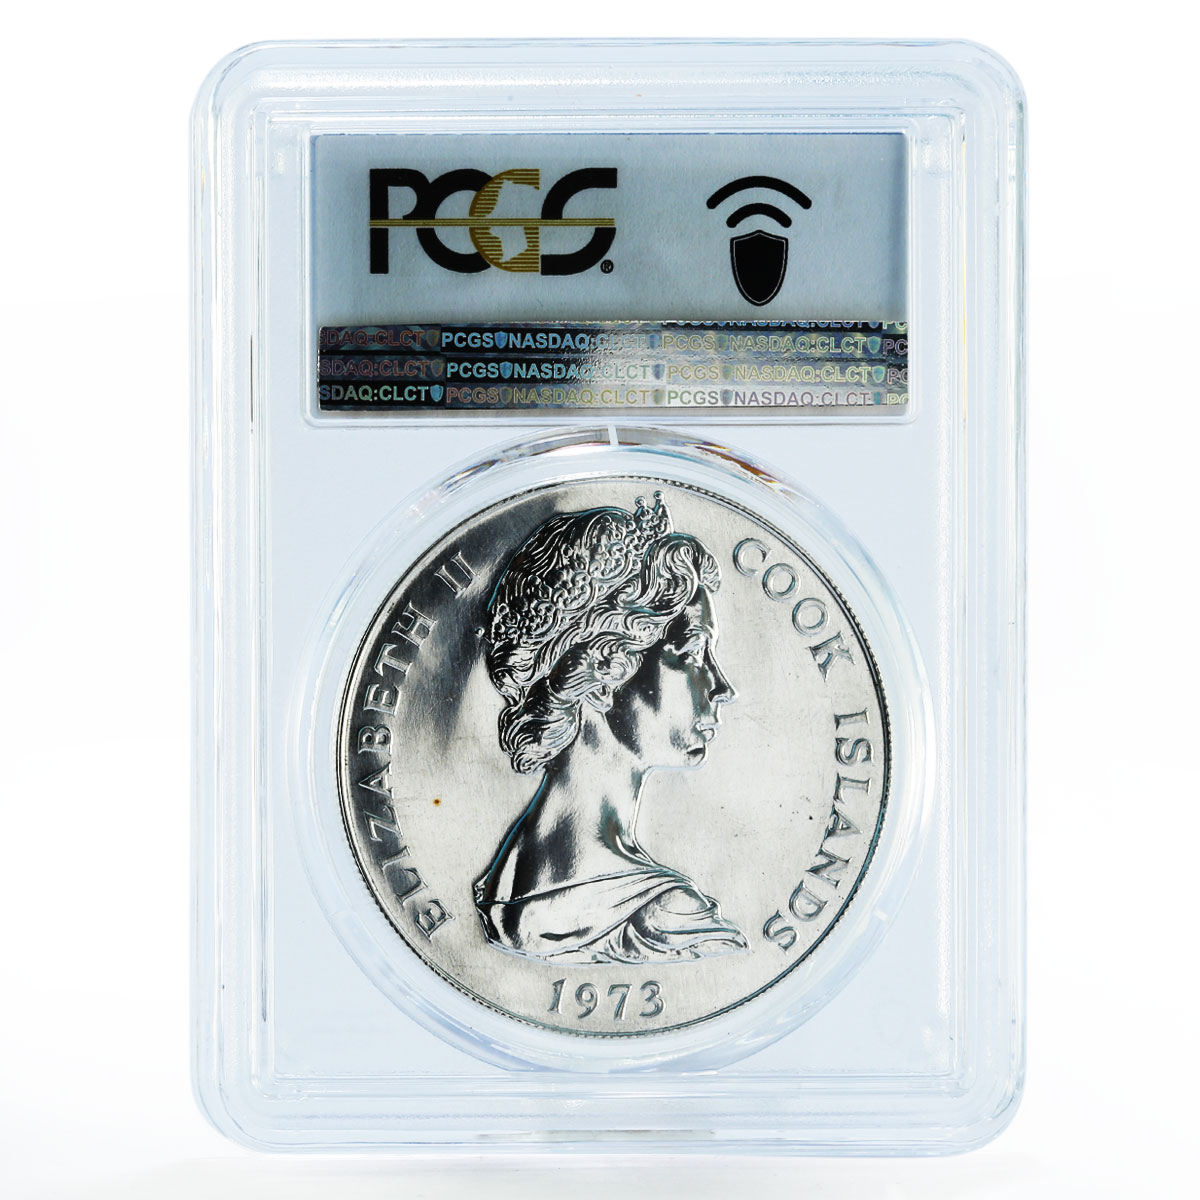 Cook Islands 7,5 dollars Cook's Discovery of Harvey MS68 PCGS silver coin 1973